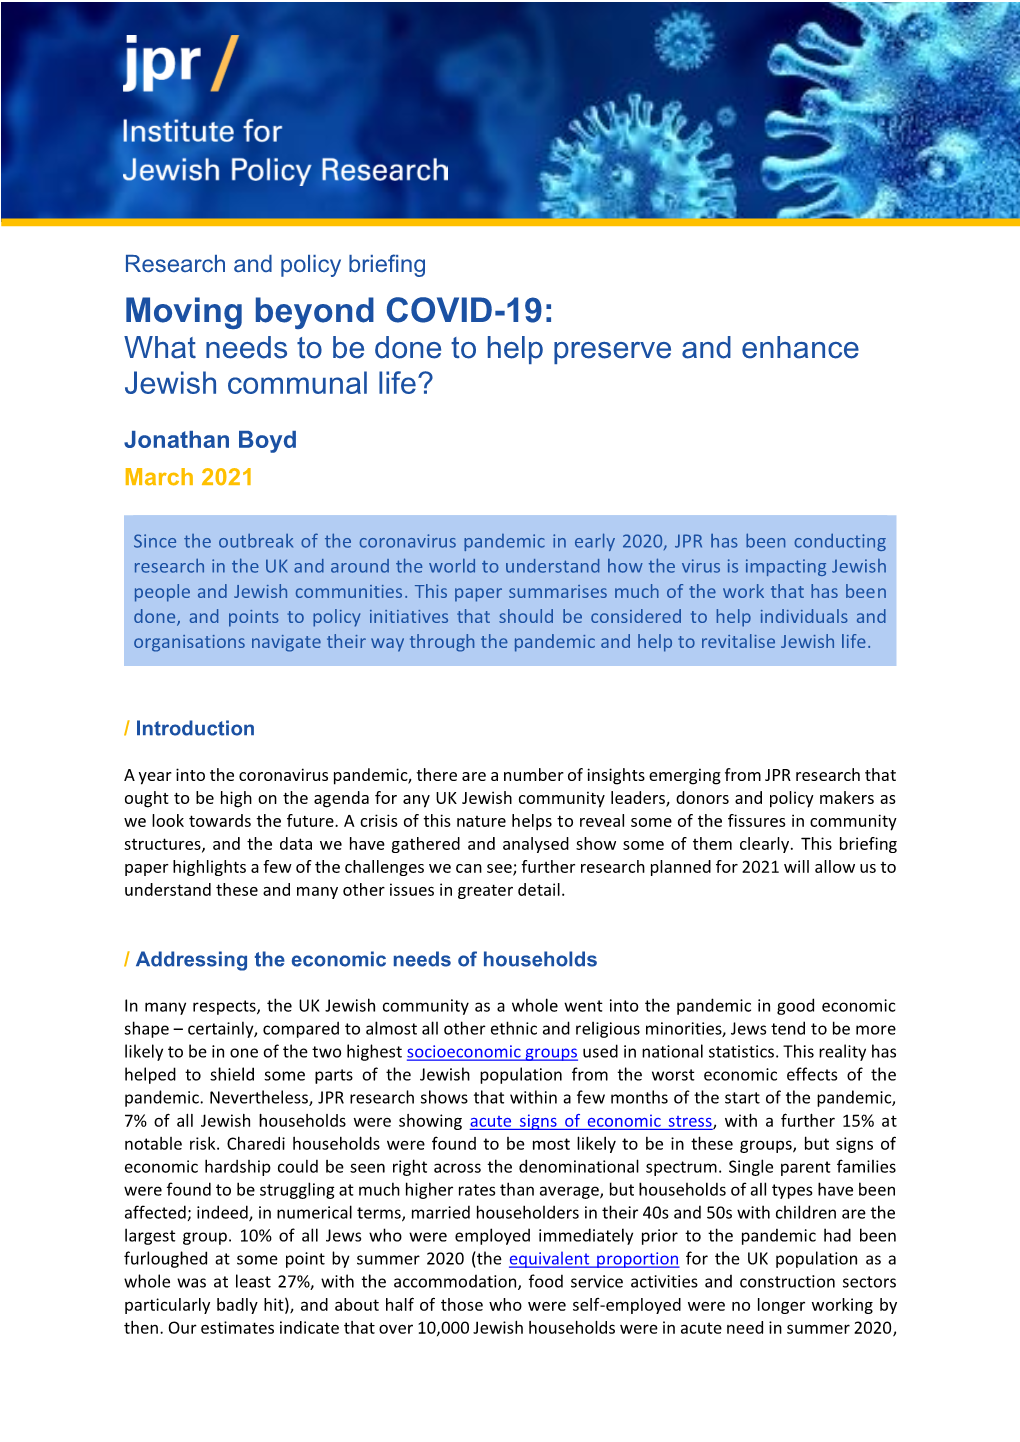 Moving Beyond COVID-19: What Needs to Be Done to Help Preserve and Enhance Jewish Communal Life?